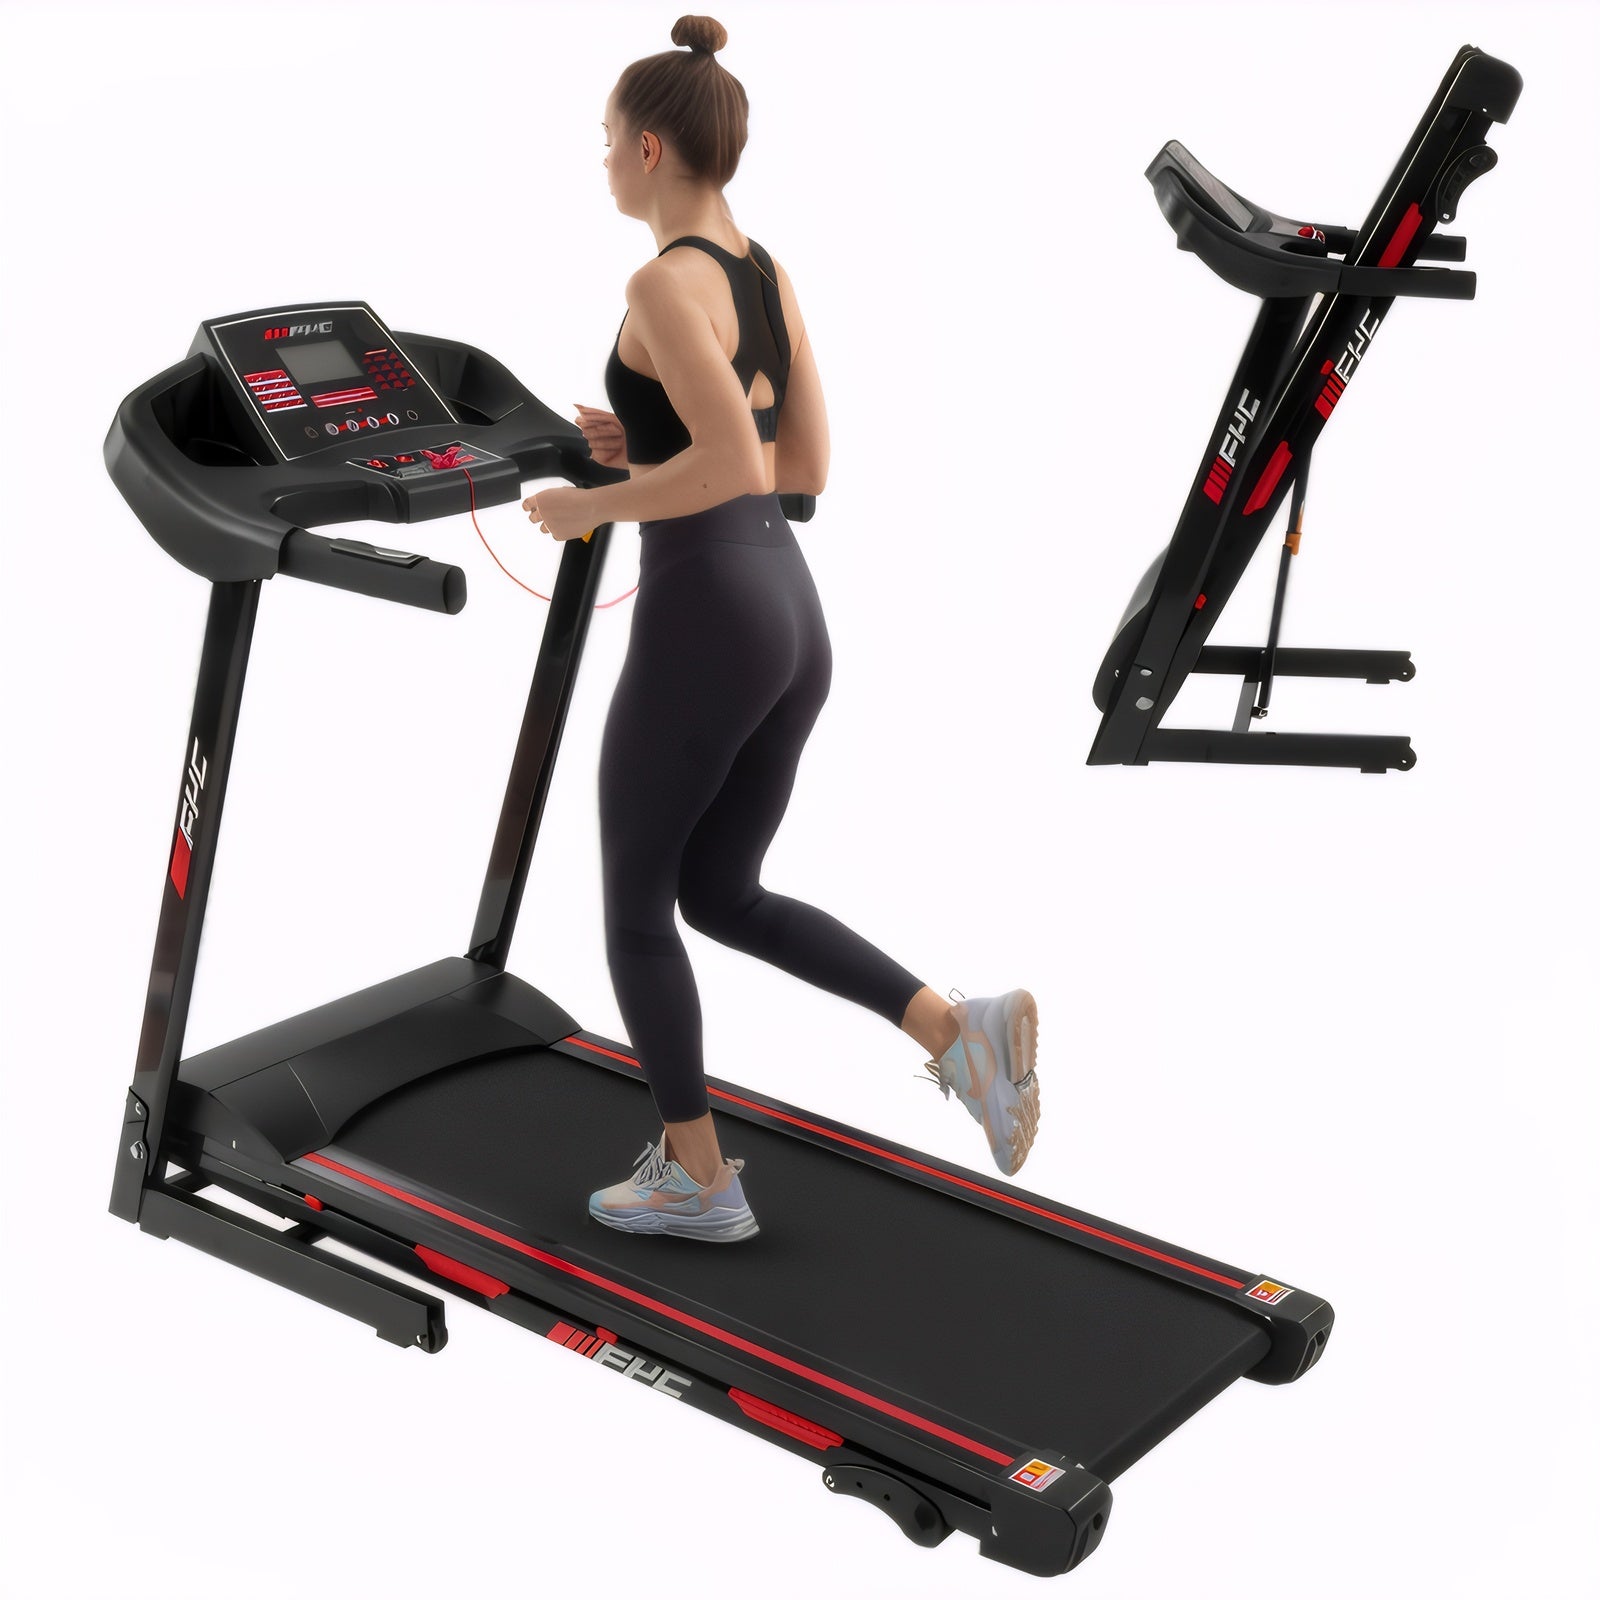 Folding Treadmill for Home - 330 LBS Weight Capacity Running Machine with Incline/Bluetooth, 3.5HP 10MPH Max Speed Foldable Electric Treadmill Easily Assembly, Home Gym Workout Exercise